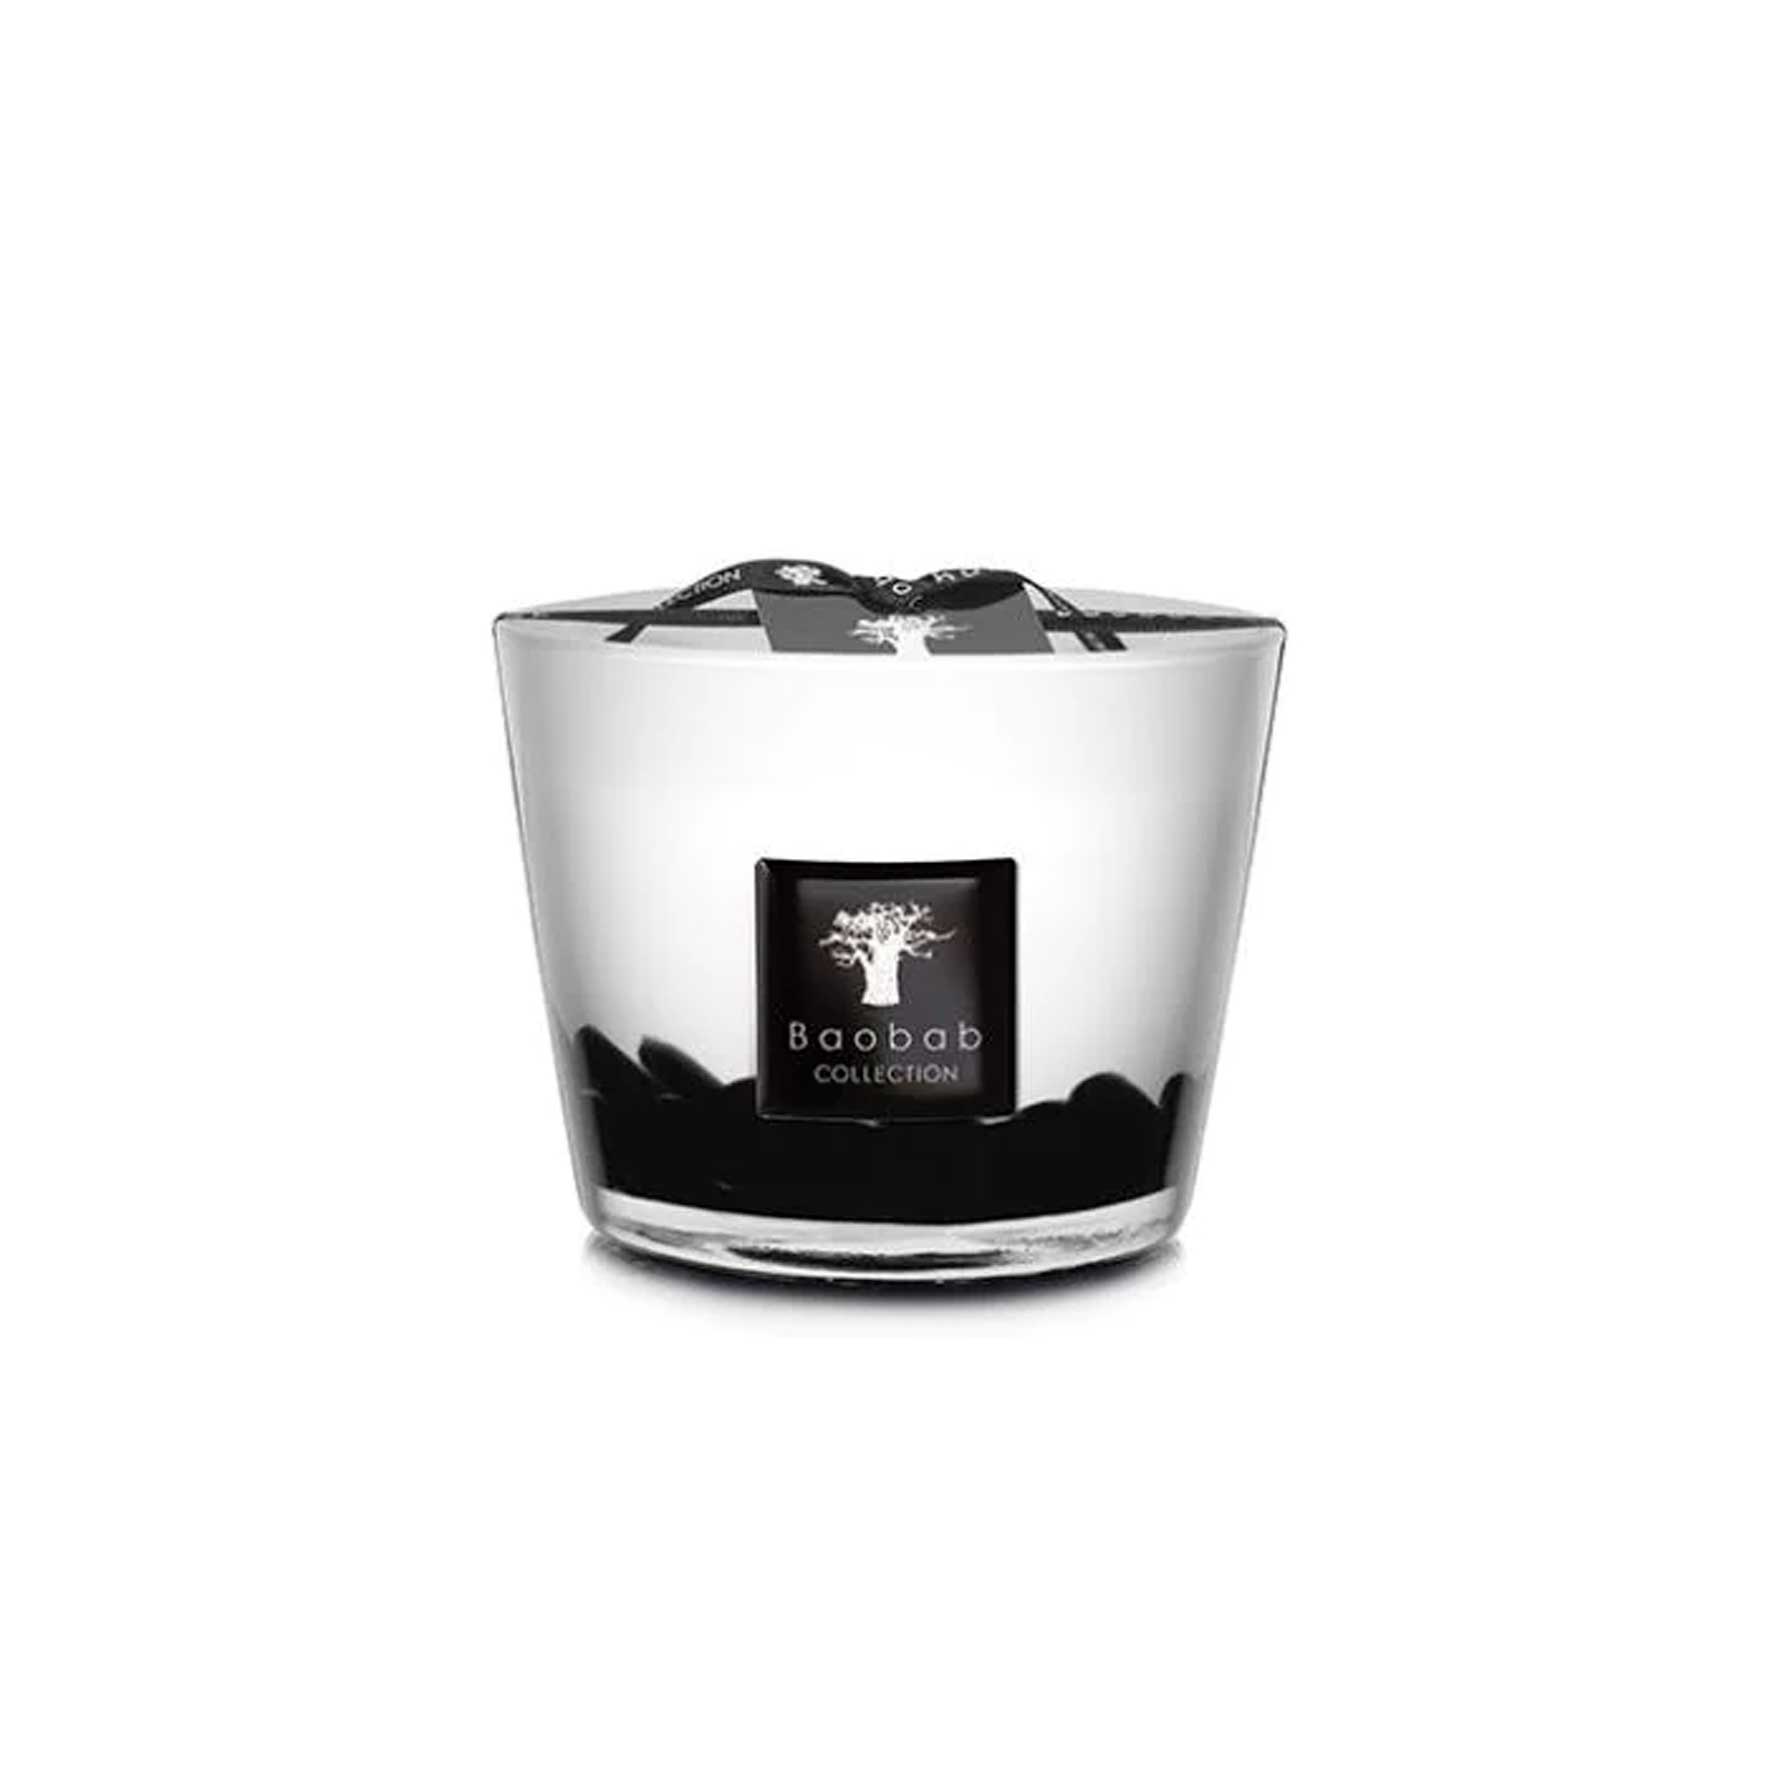 Baobab Collection Feathers Scented Candle | Barker & Stonehouse